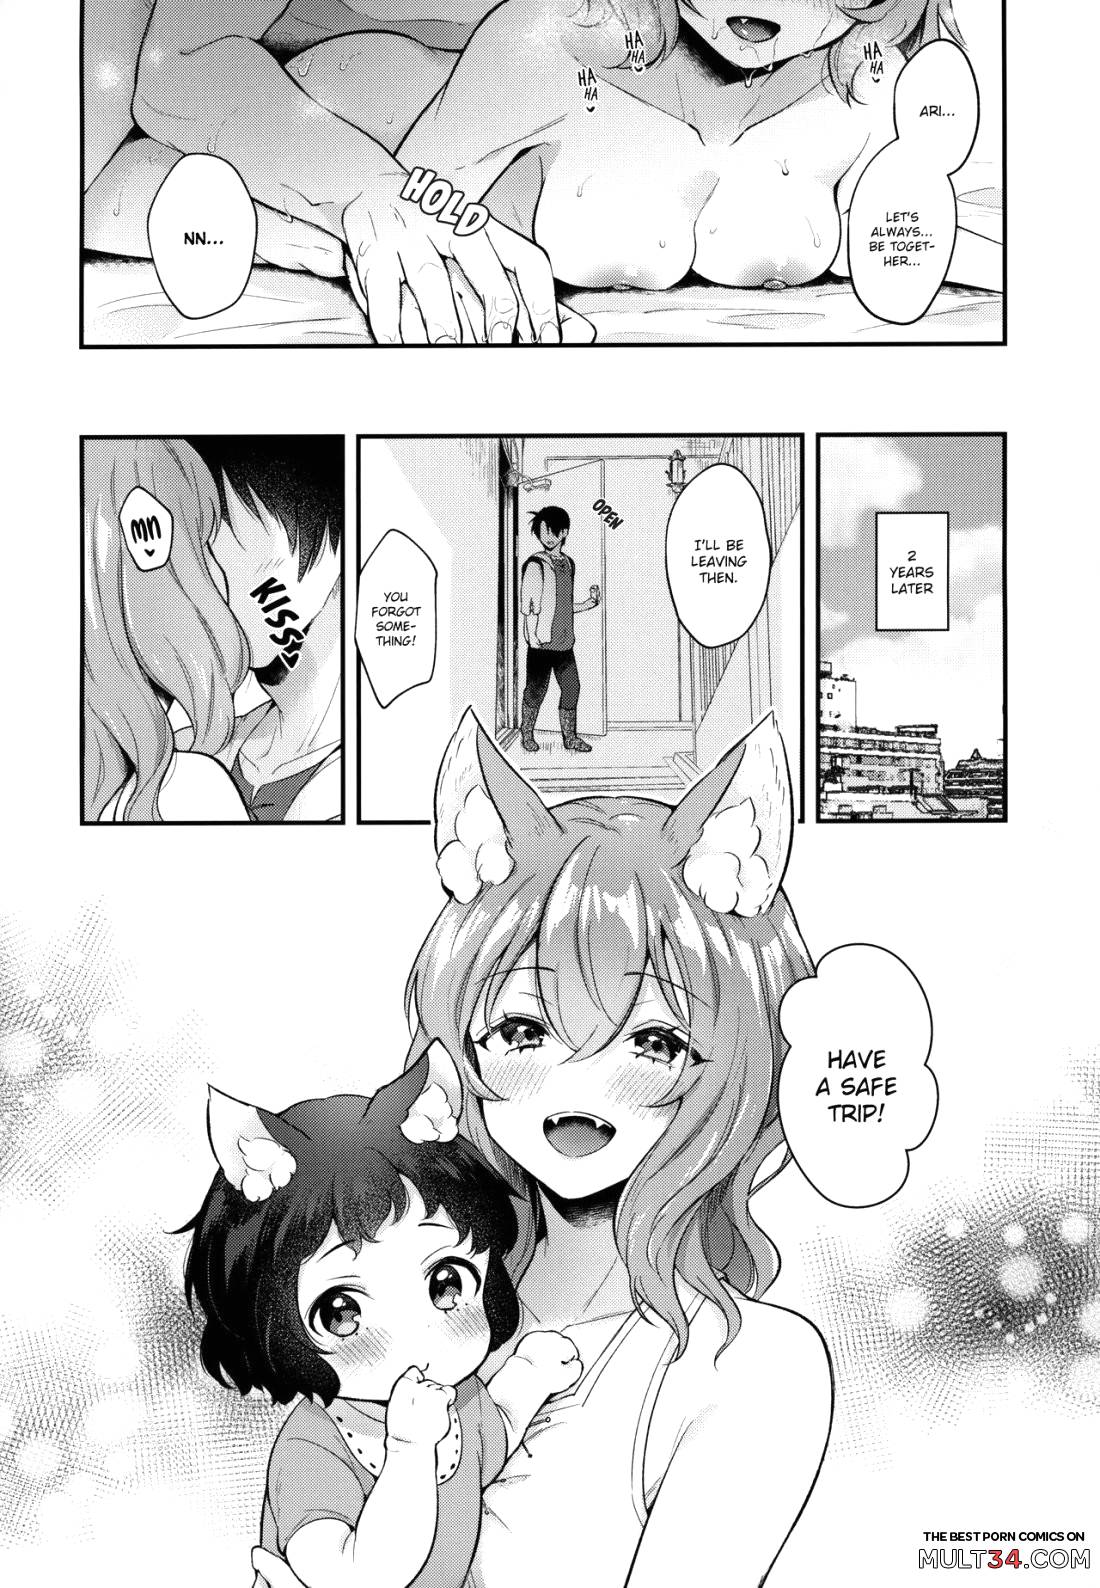 Kimi to Issho page 16